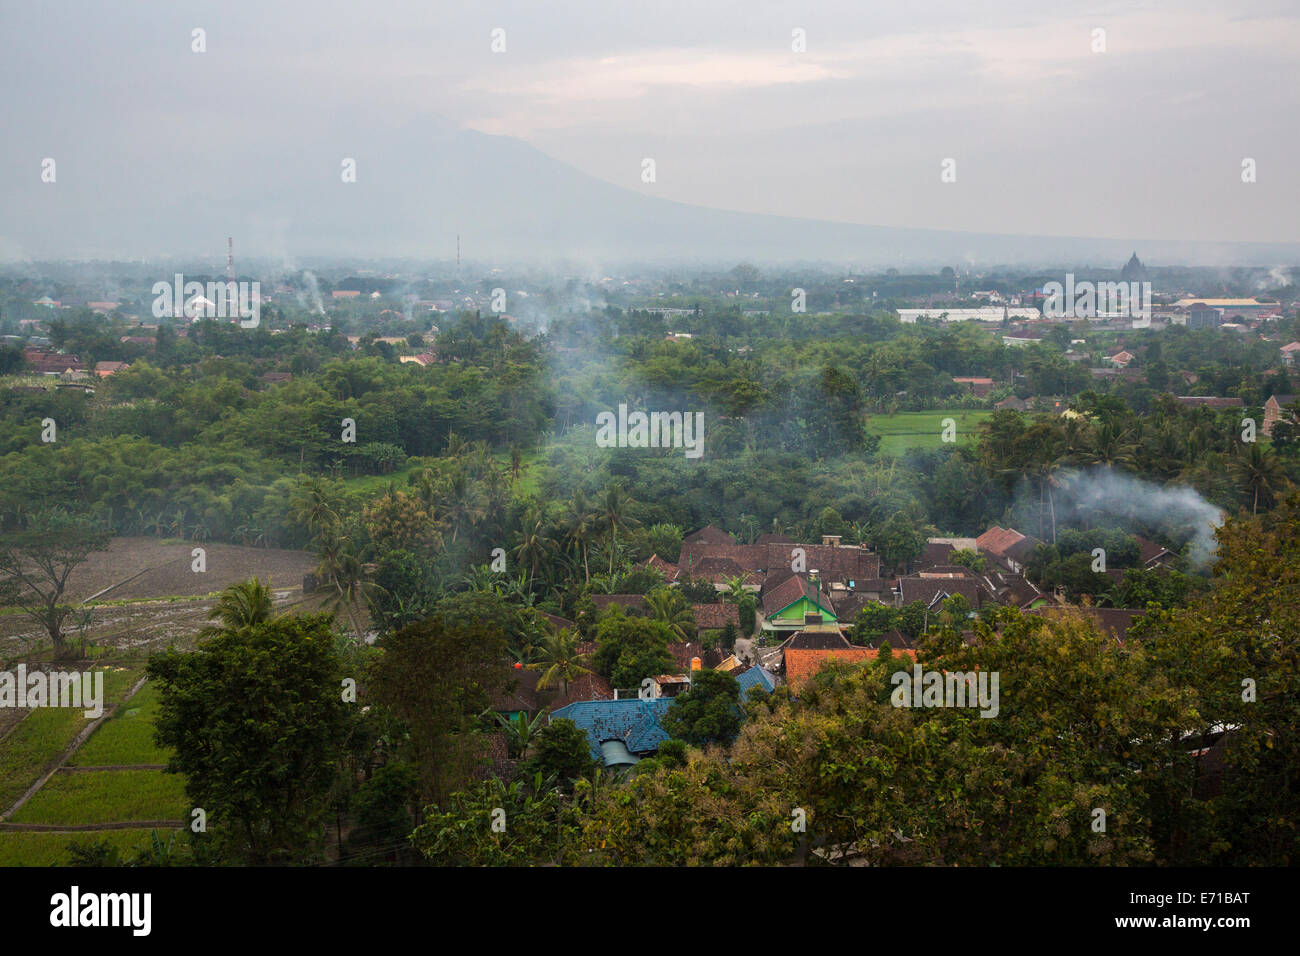 Yogyakarta, Java, Indonesia.  Charcoal Fires for Cooking Evening Meals and Burning Trash Cause Extensive Atmospheric Pollution. Stock Photo